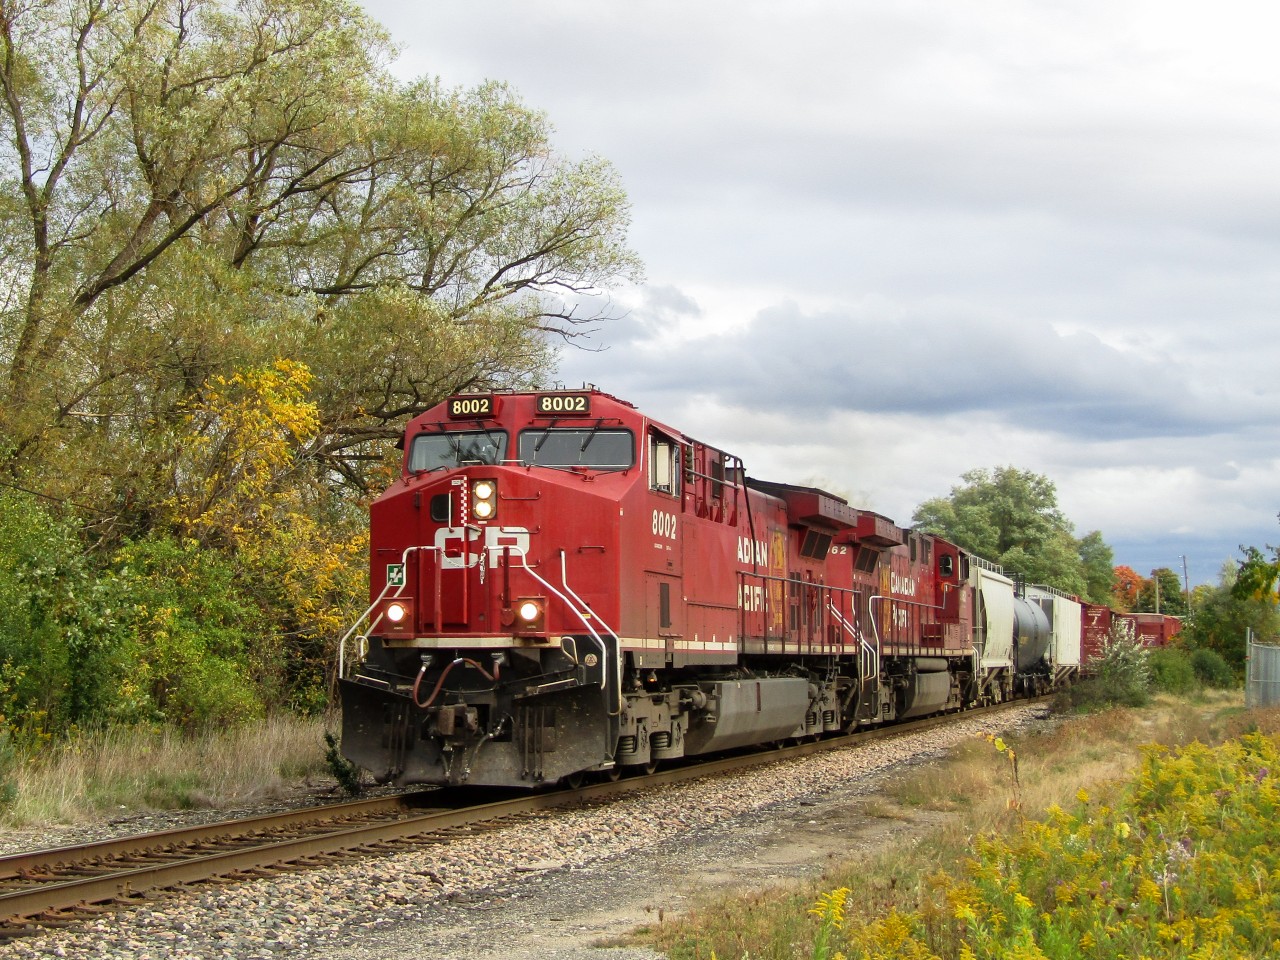 CP 421-02 crawls northbound through Woodbridge past the Wooodbridge Foam Corporation at Mile 11.9 of the CP MACtier sub. Leading the way is Southwestern Ontario icon CP 8002 (254 memories) and CP 8062, 2 AC4400CWM rebuilds. After being cloudy with tiny pockets of sun, it was nice to see the clouds thin out for one last train before heading home; even if it is 8002.